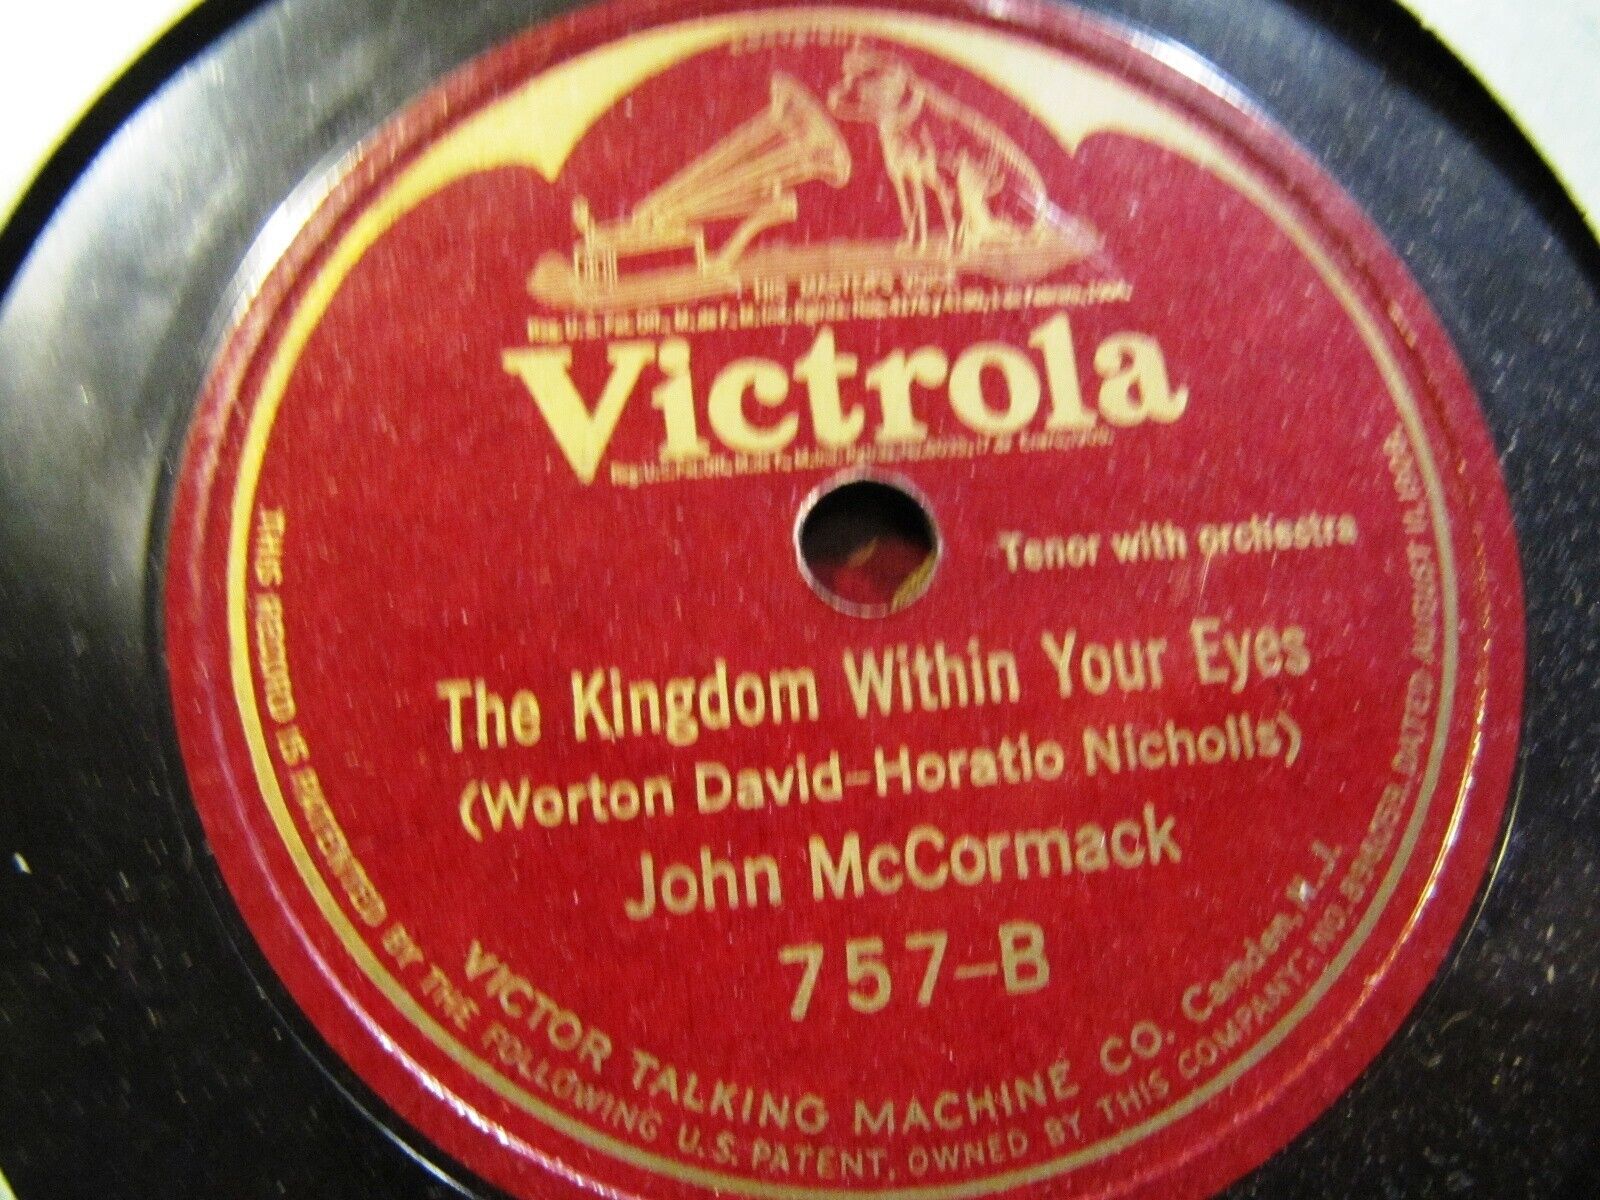 1914 John McCormack Nichols THE KINGDOM WITHIN YOUR EYES Tosti Parted VICTOR 797